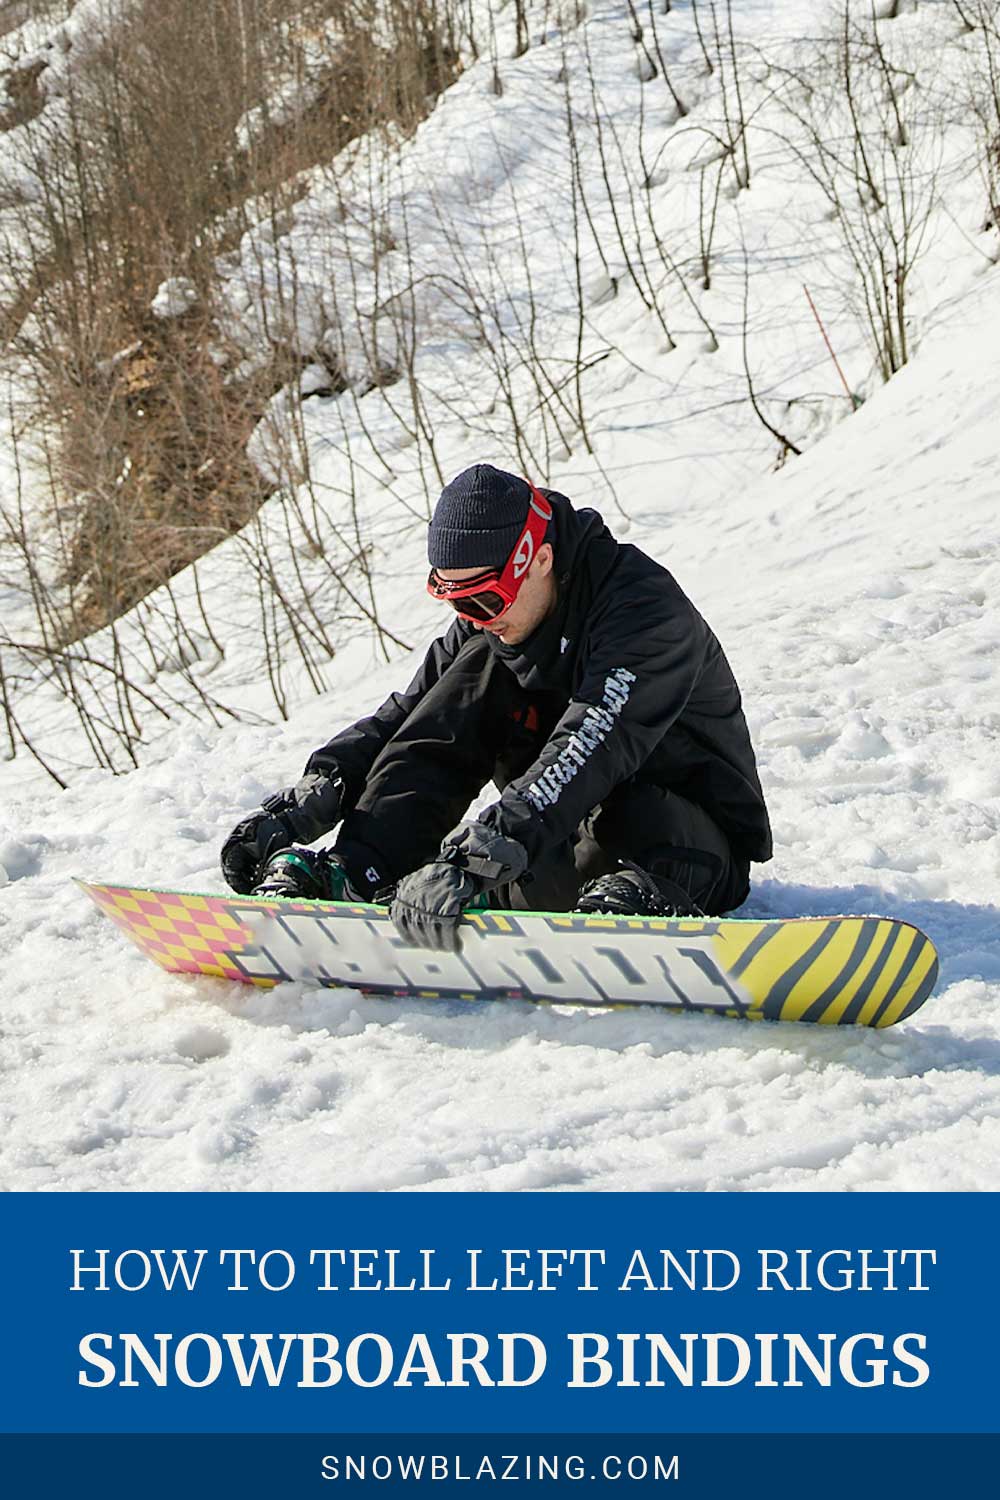 Man sitting in a snowboard track adjusting binding on boot - How to Tell Left and Right Snowboard Bindings.